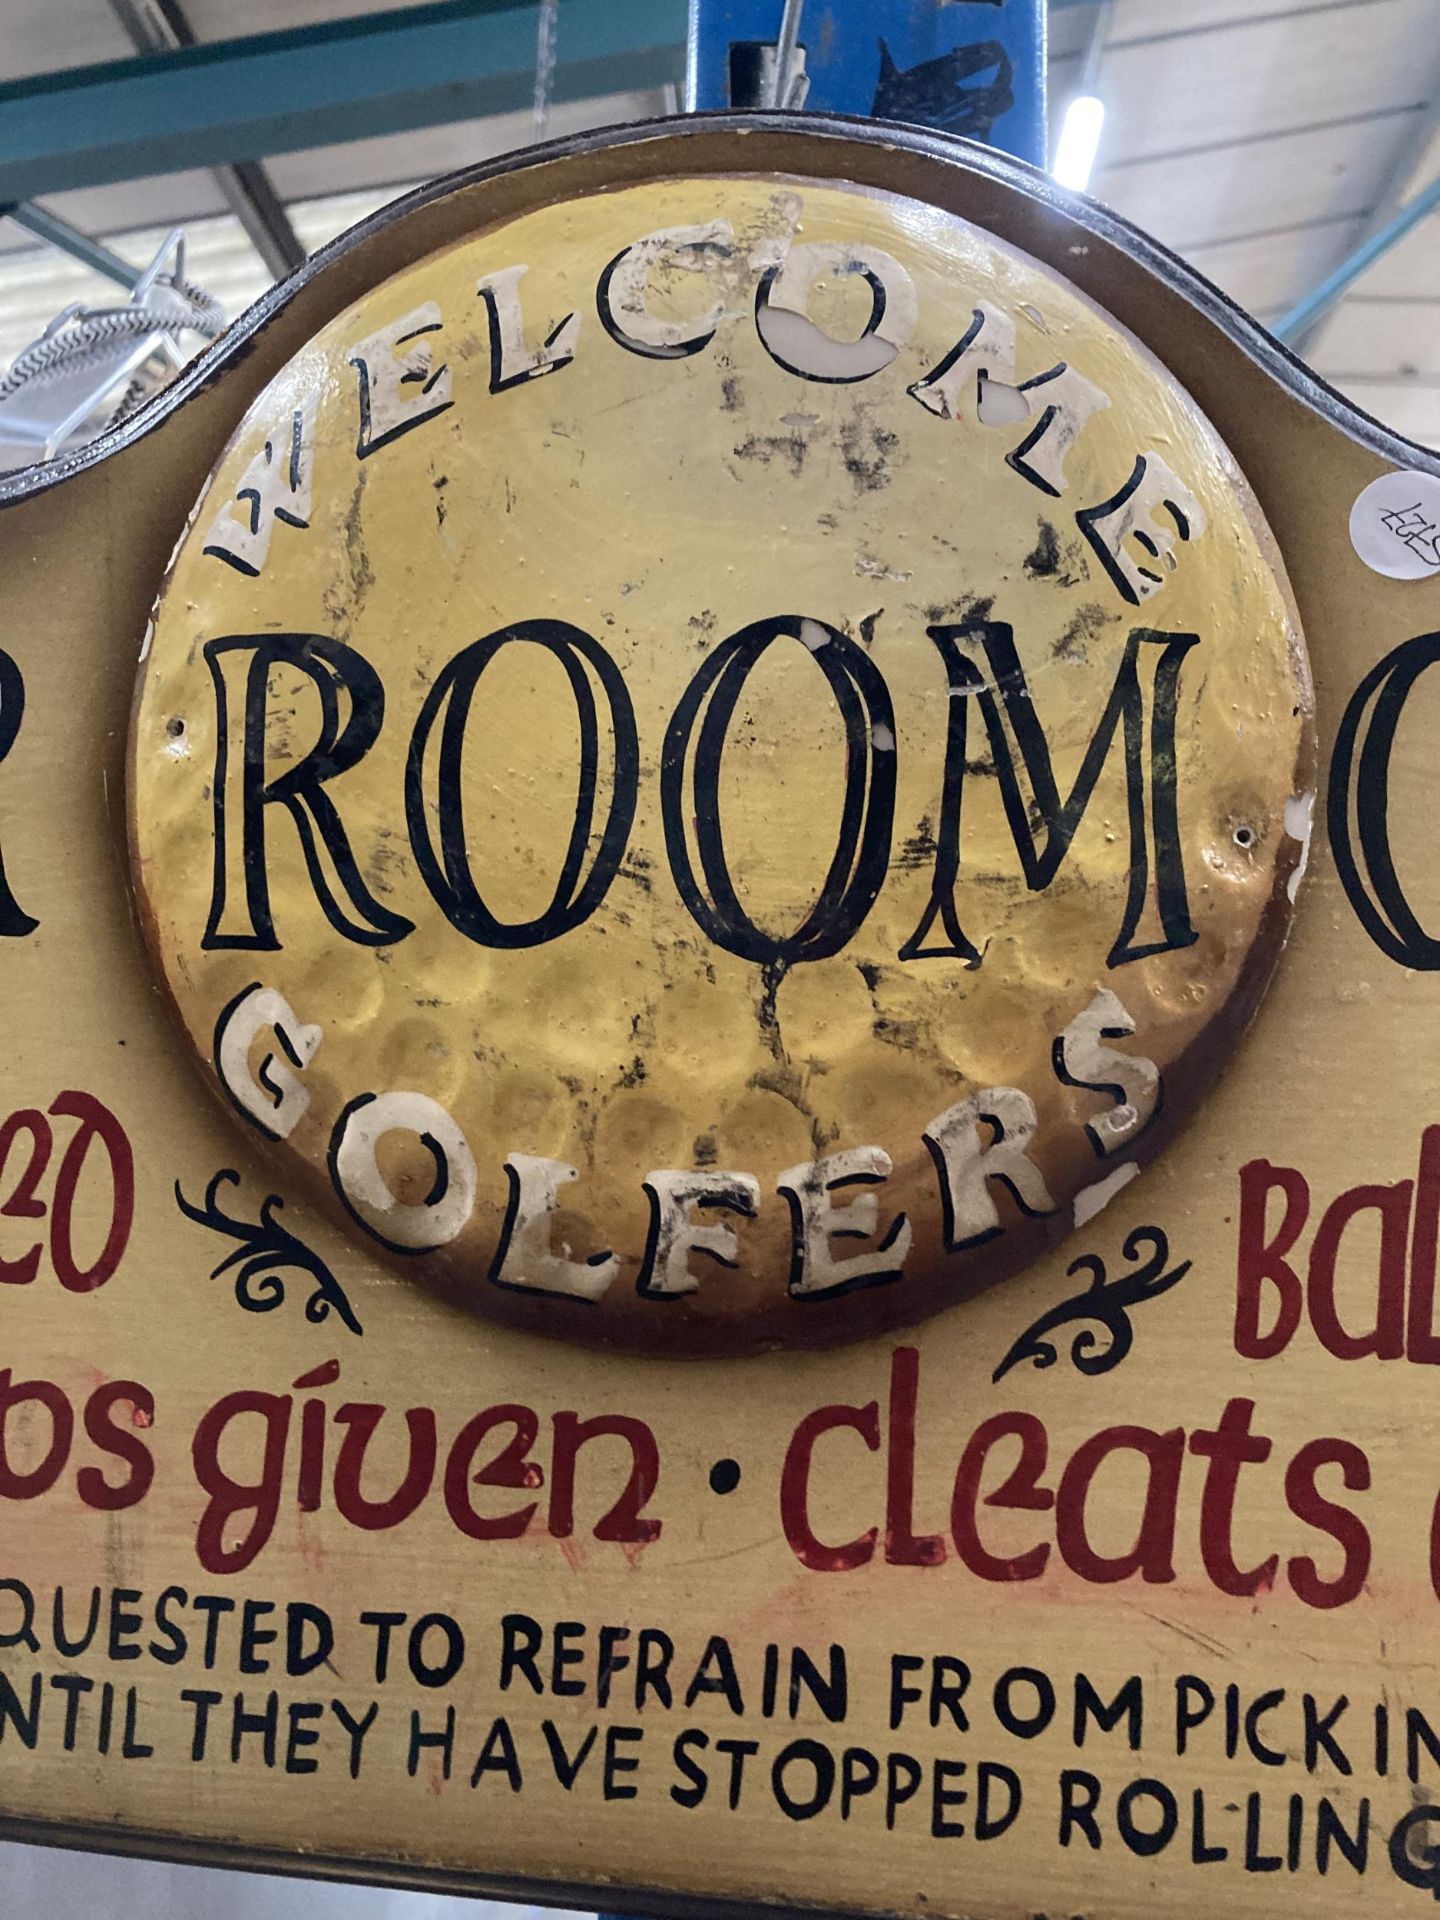 A WELCOME GOLFERS BAR ROOM OPEN WOODEN SIGN - Image 2 of 2